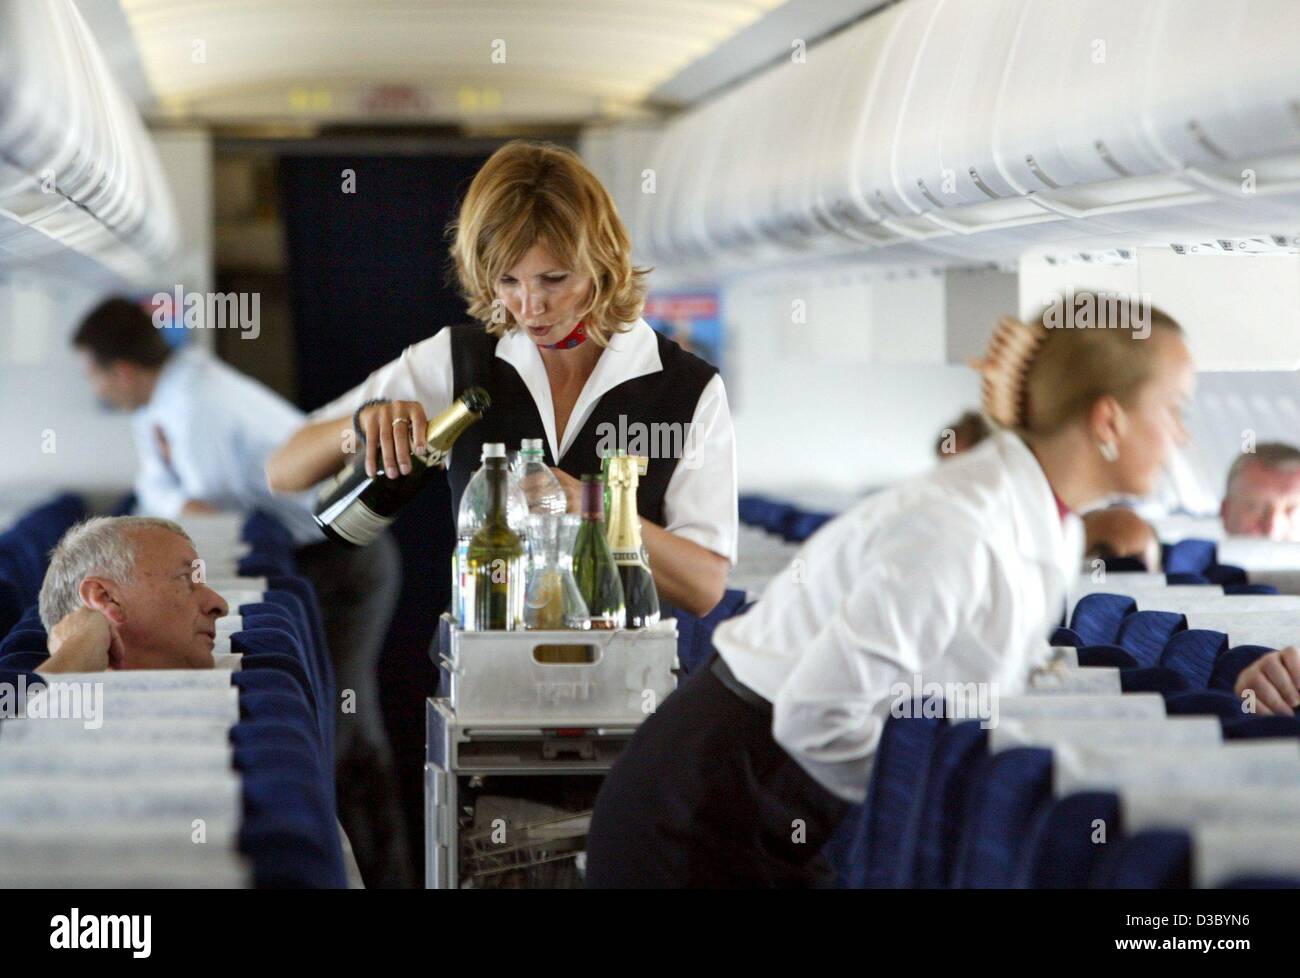 (dpa) - A stewardess of the Deutsche Lufthansa airline offers passengers a drink during a flight from Dessau, Germany, 17 July 2003. Stock Photo